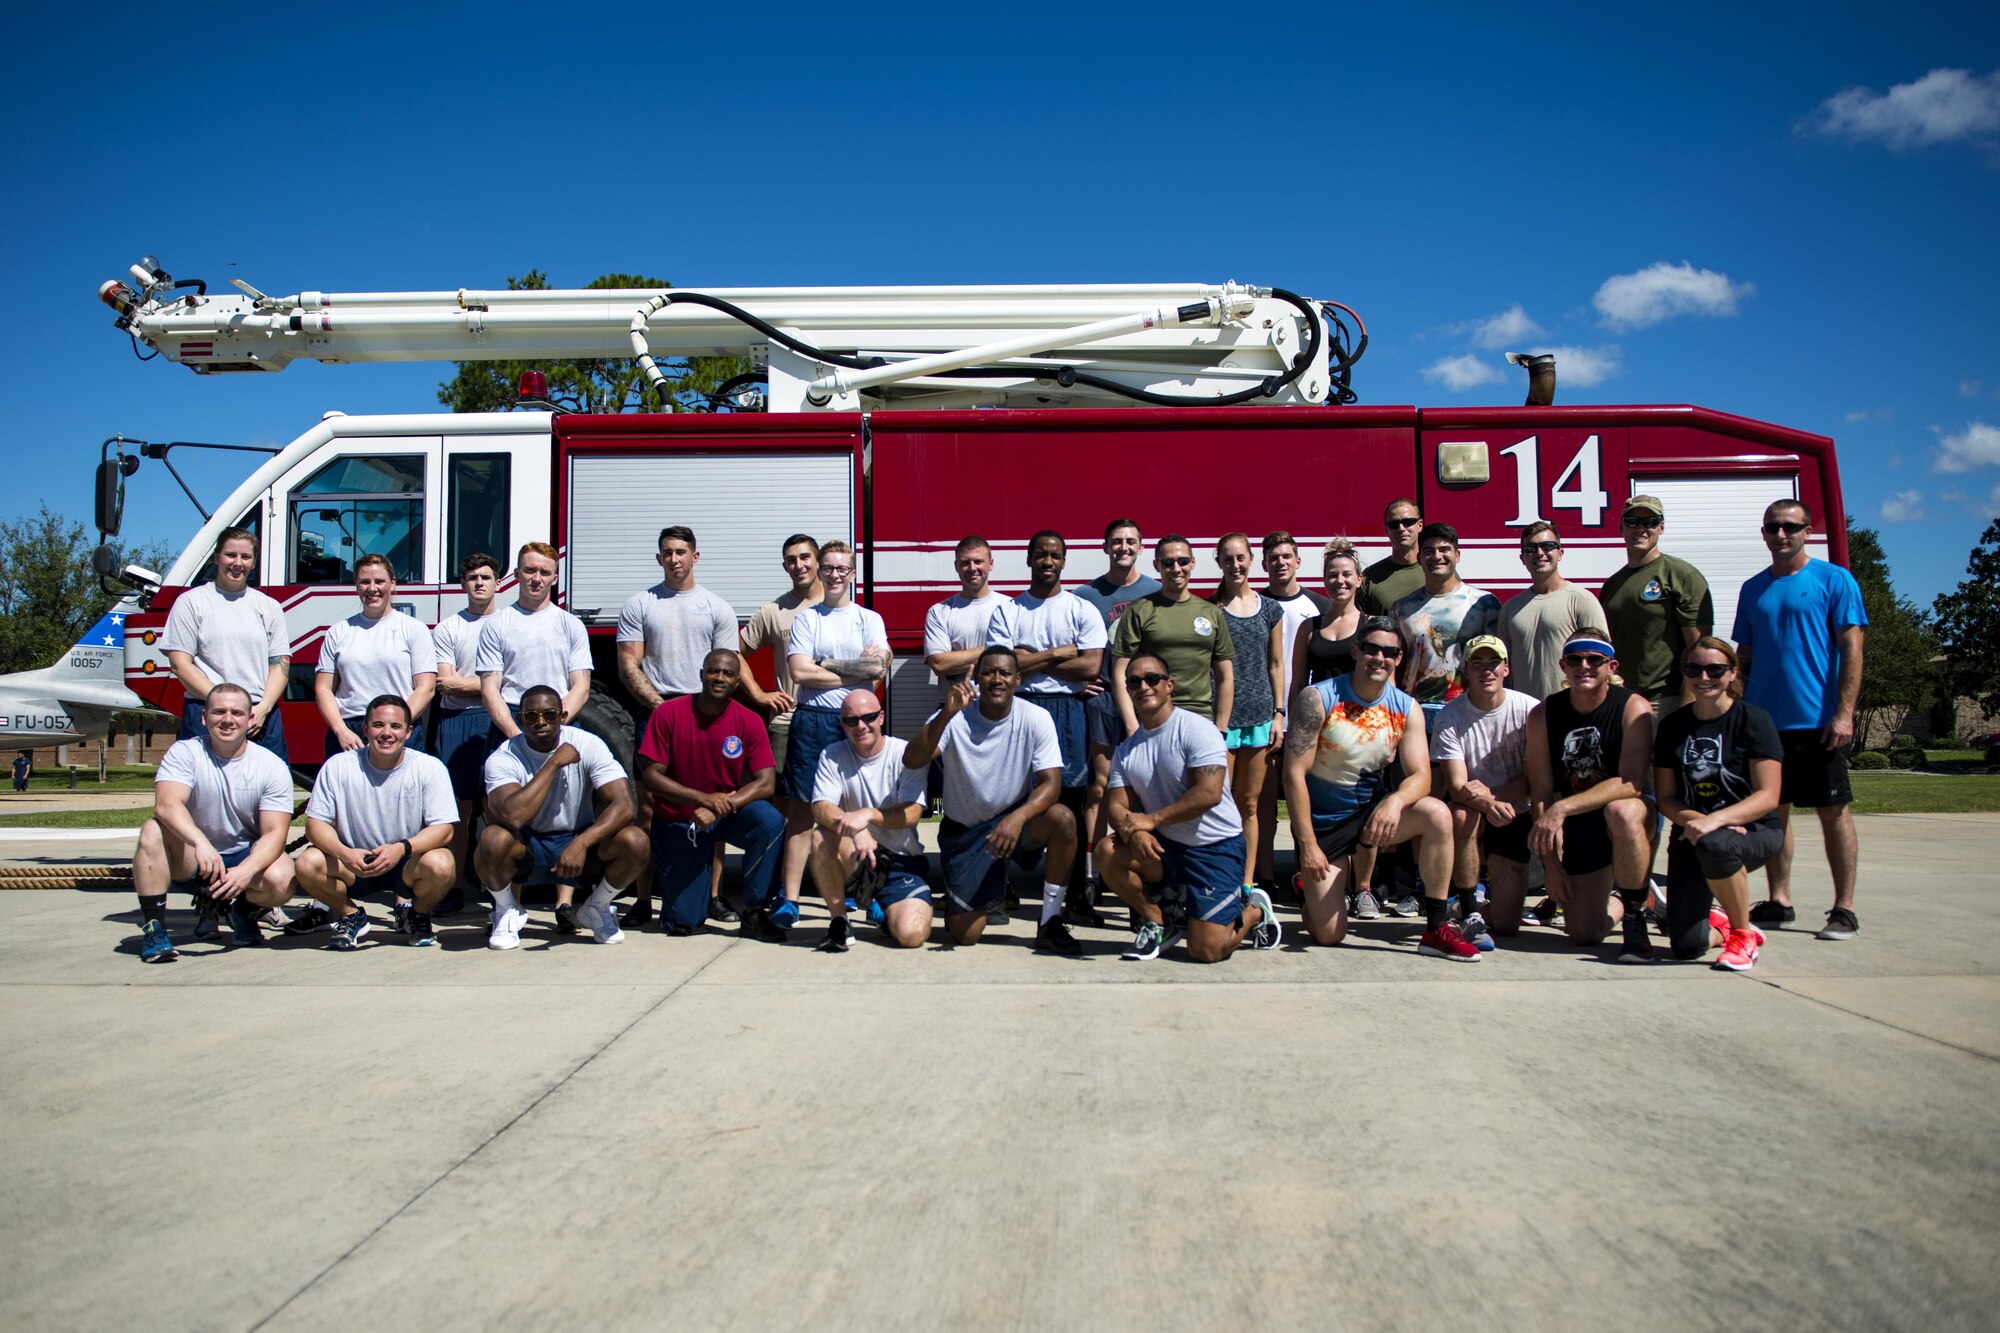 Participants of the 2017 Fire Prevention Week Fire Muster pose for a picture, Oct. 13, 2017, at Moody Air Force Base, Ga. The 23d Civil Engineer Squadron fire department designed the muster to allow teams of Airmen to compete in several events, ranging from a hose roll to a fire truck pull. Event organizers wanted Airmen to experience being a firefighter in a way that got people active. (U.S. Air Force photo by Airman 1st Class Erick Requadt)